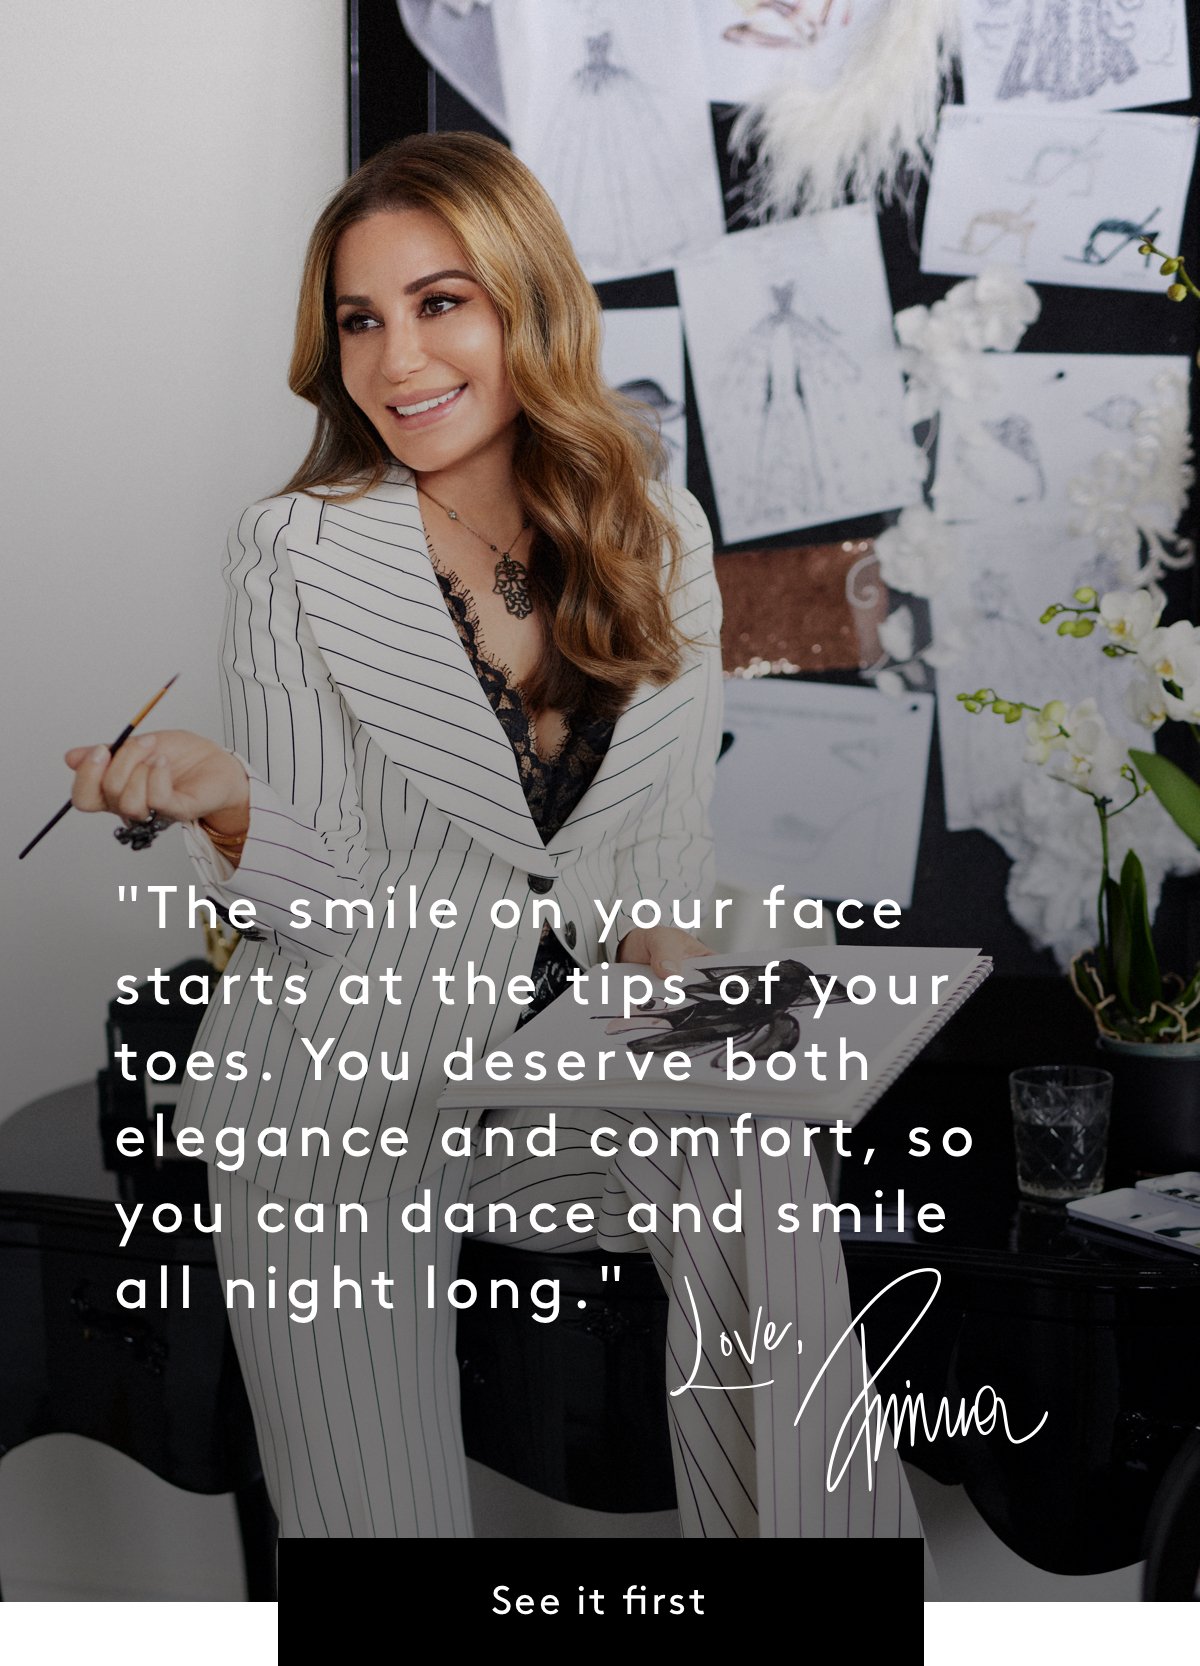 “The smile on your face starts at the tips of your toes. You deserve both elegance and comfort, so you can dance and smile all night long.” Love, Pnina | See it first